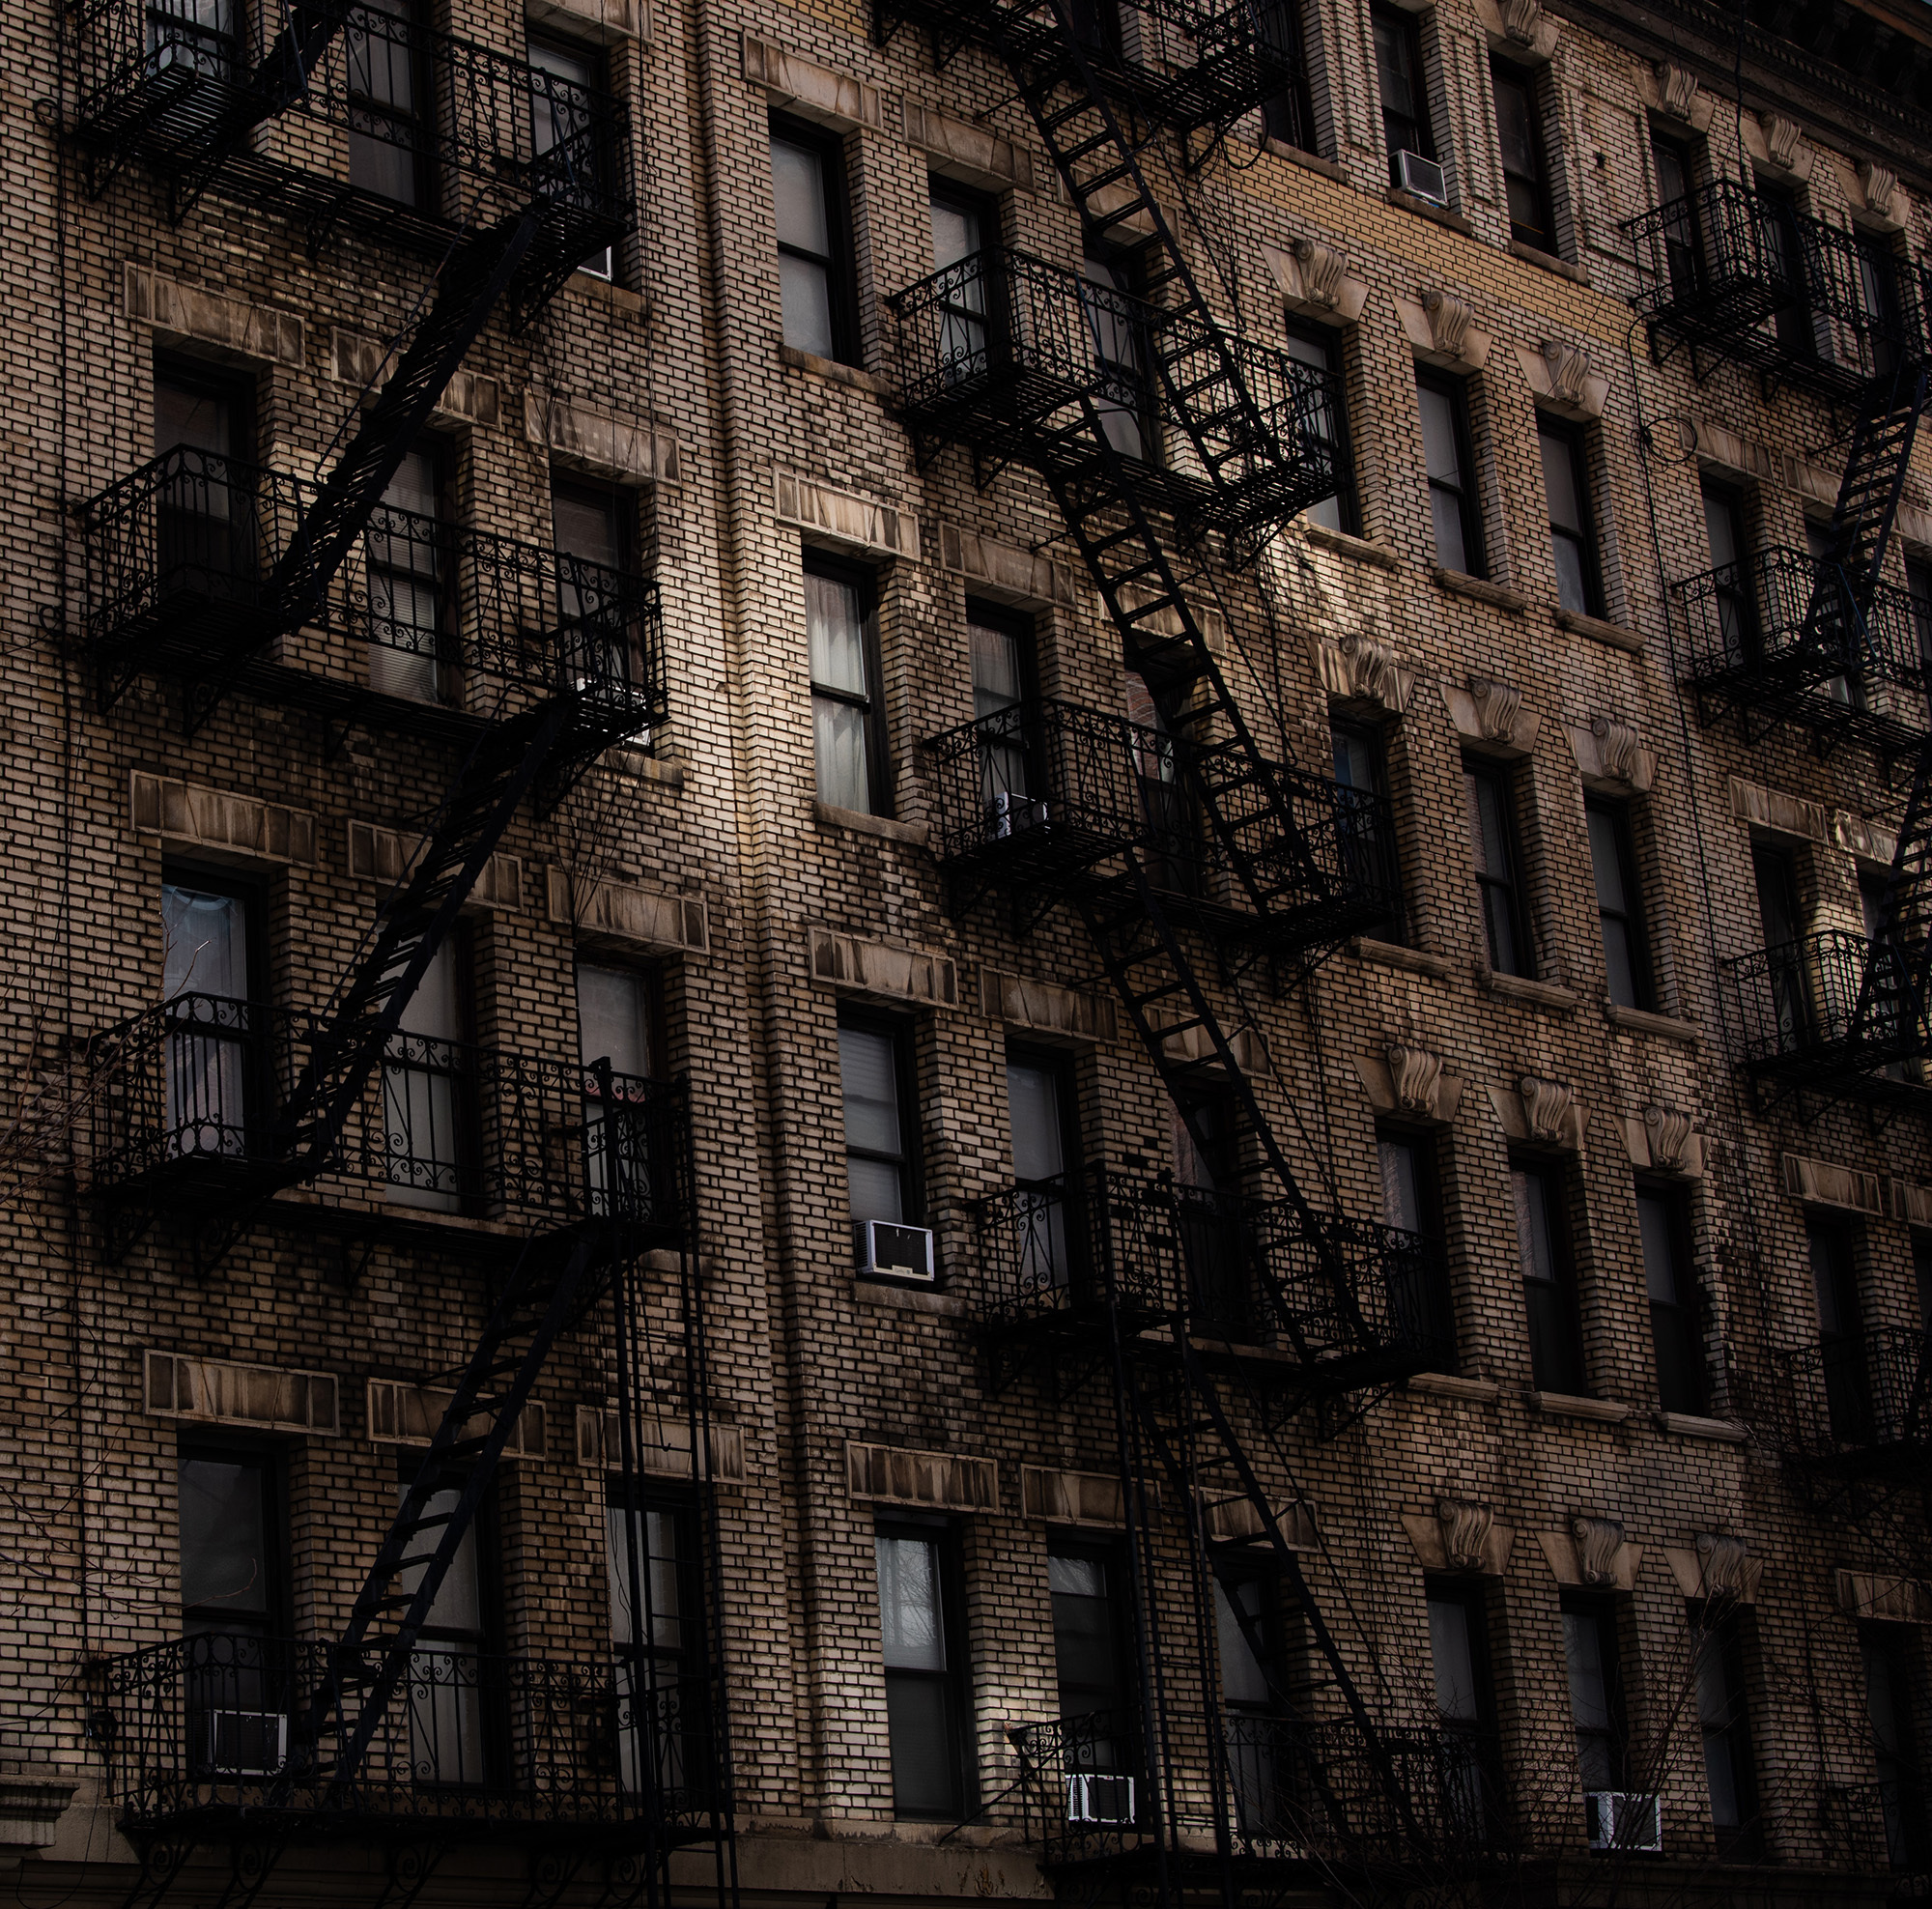 <p>Reflections bounce sunlight onto the bricks and characteristic fire escapes of some New York apartments.</p>